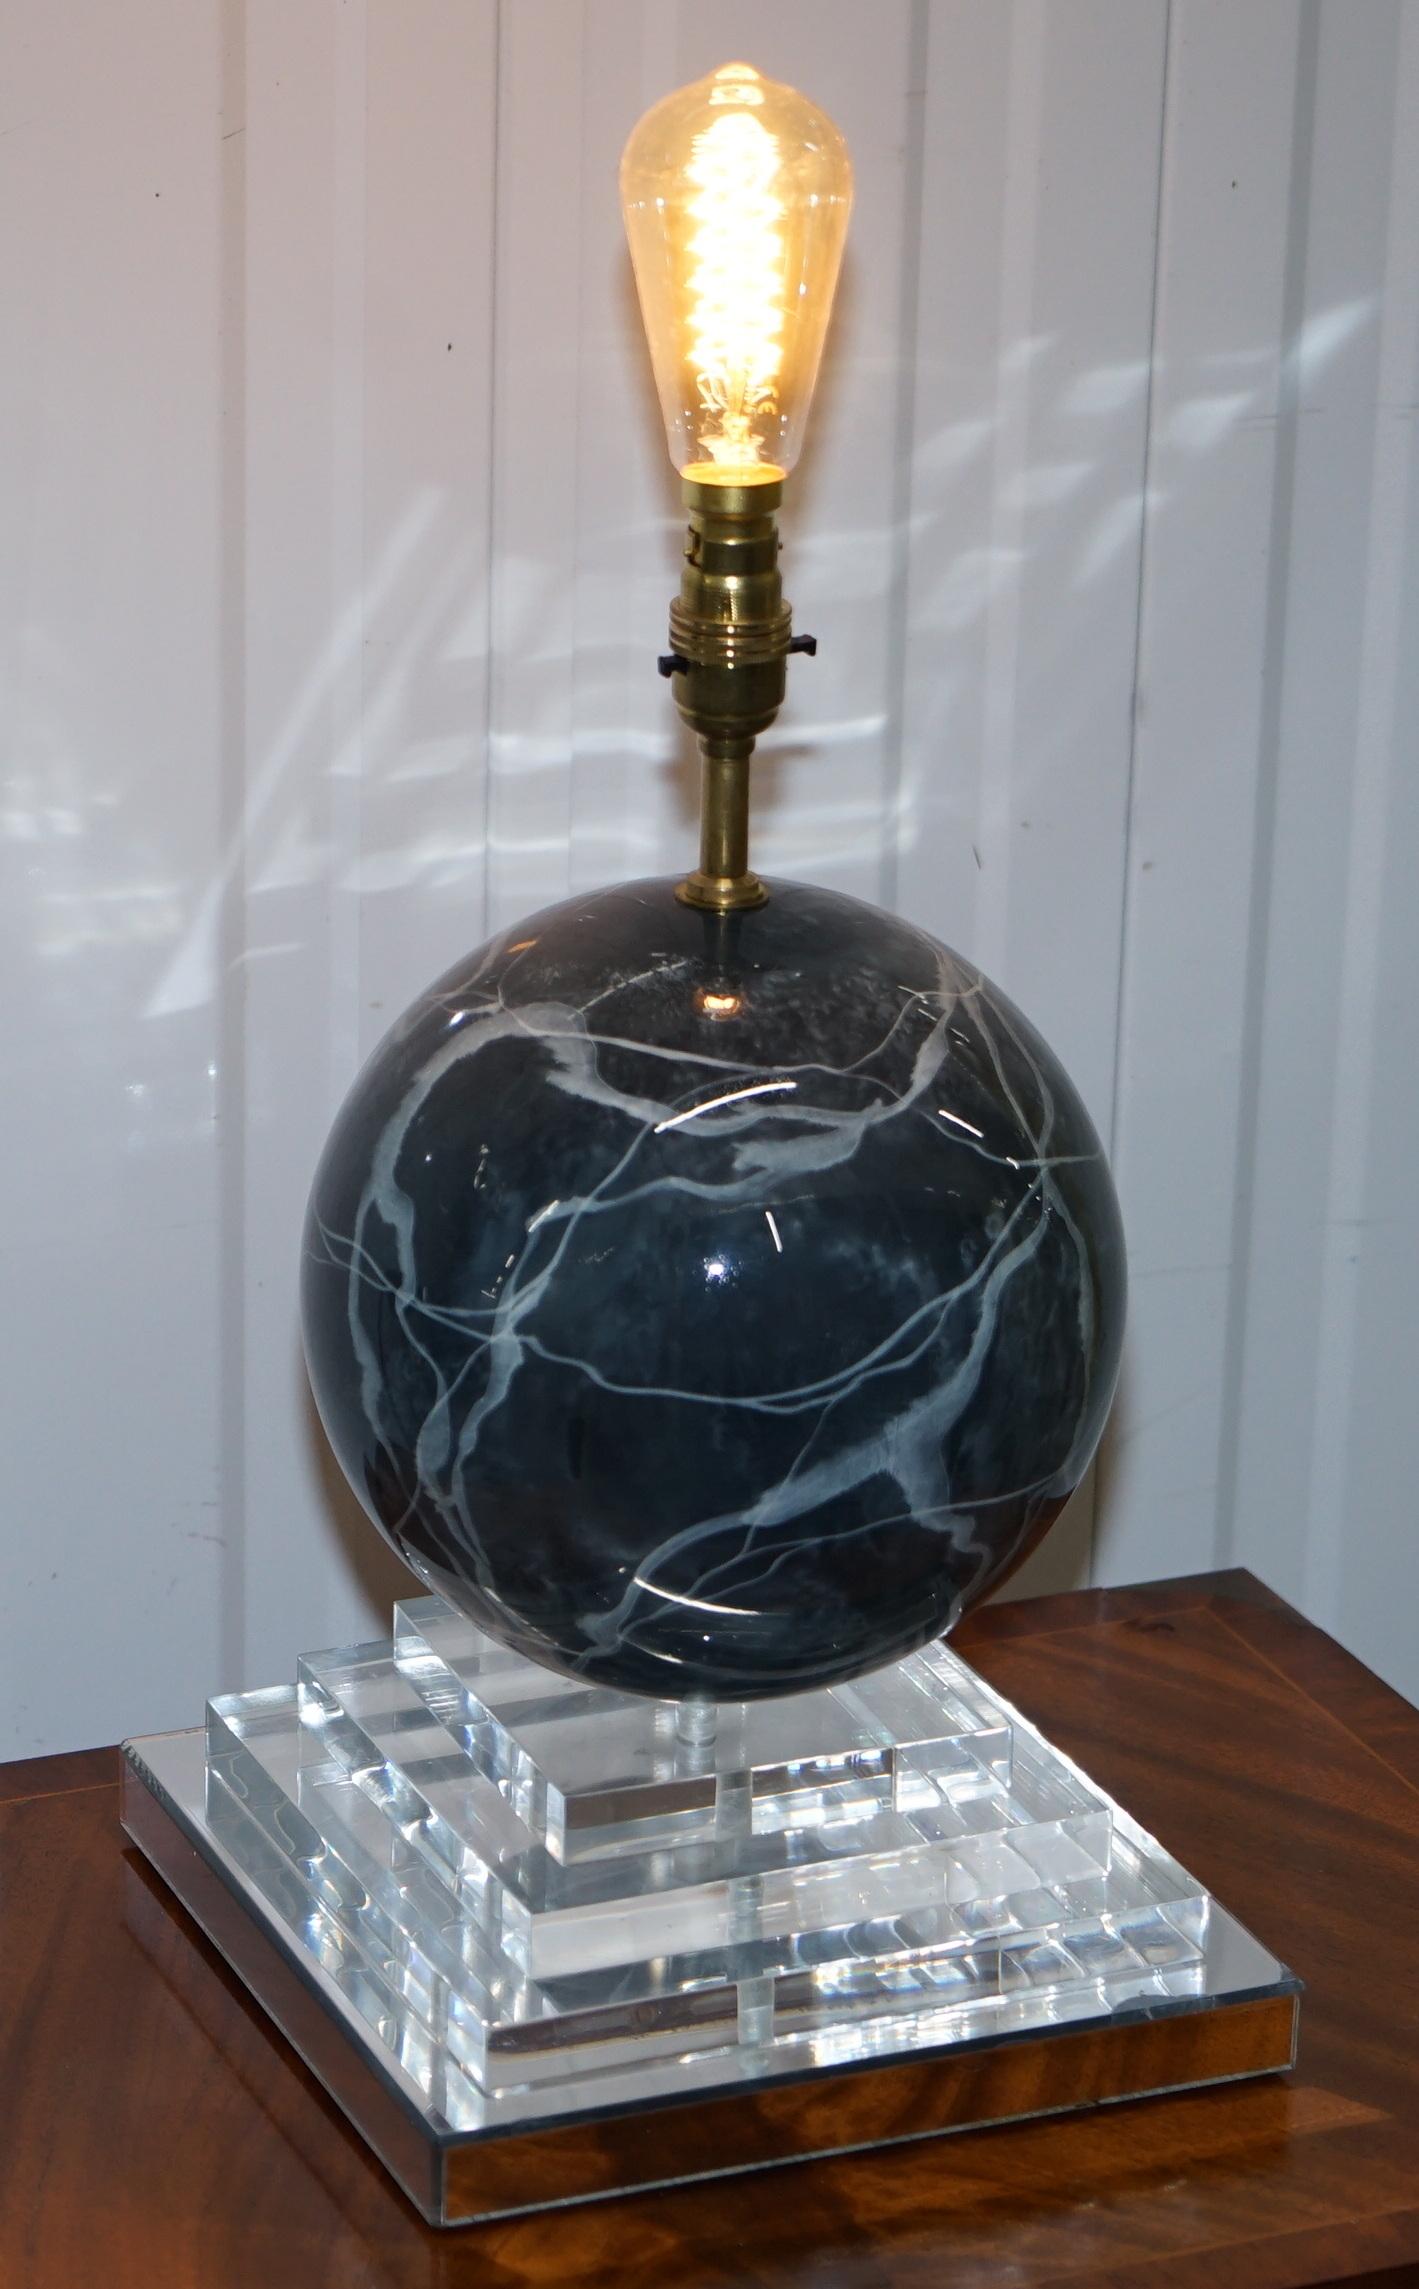 We are delighted to offer for sale this lovely vintage circa 1960s round marble finish lamp on a four step perspex base with mirrored finish

A very good looking rare and decorative table lamp, I've never seen another of this type, the round ball